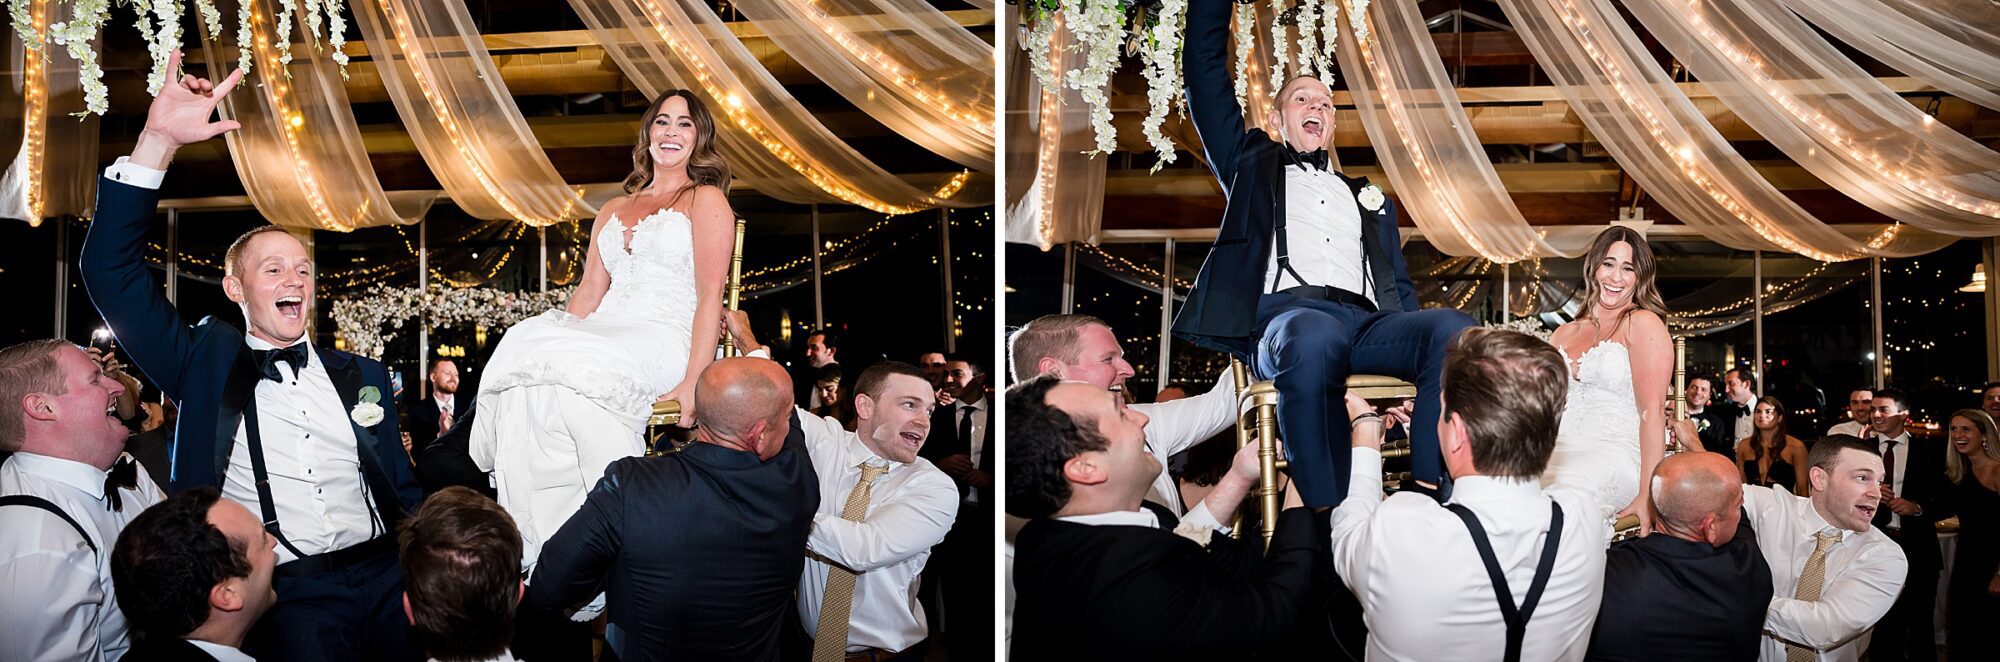 A bride and groom are in the air during their wedding reception at Liberty House